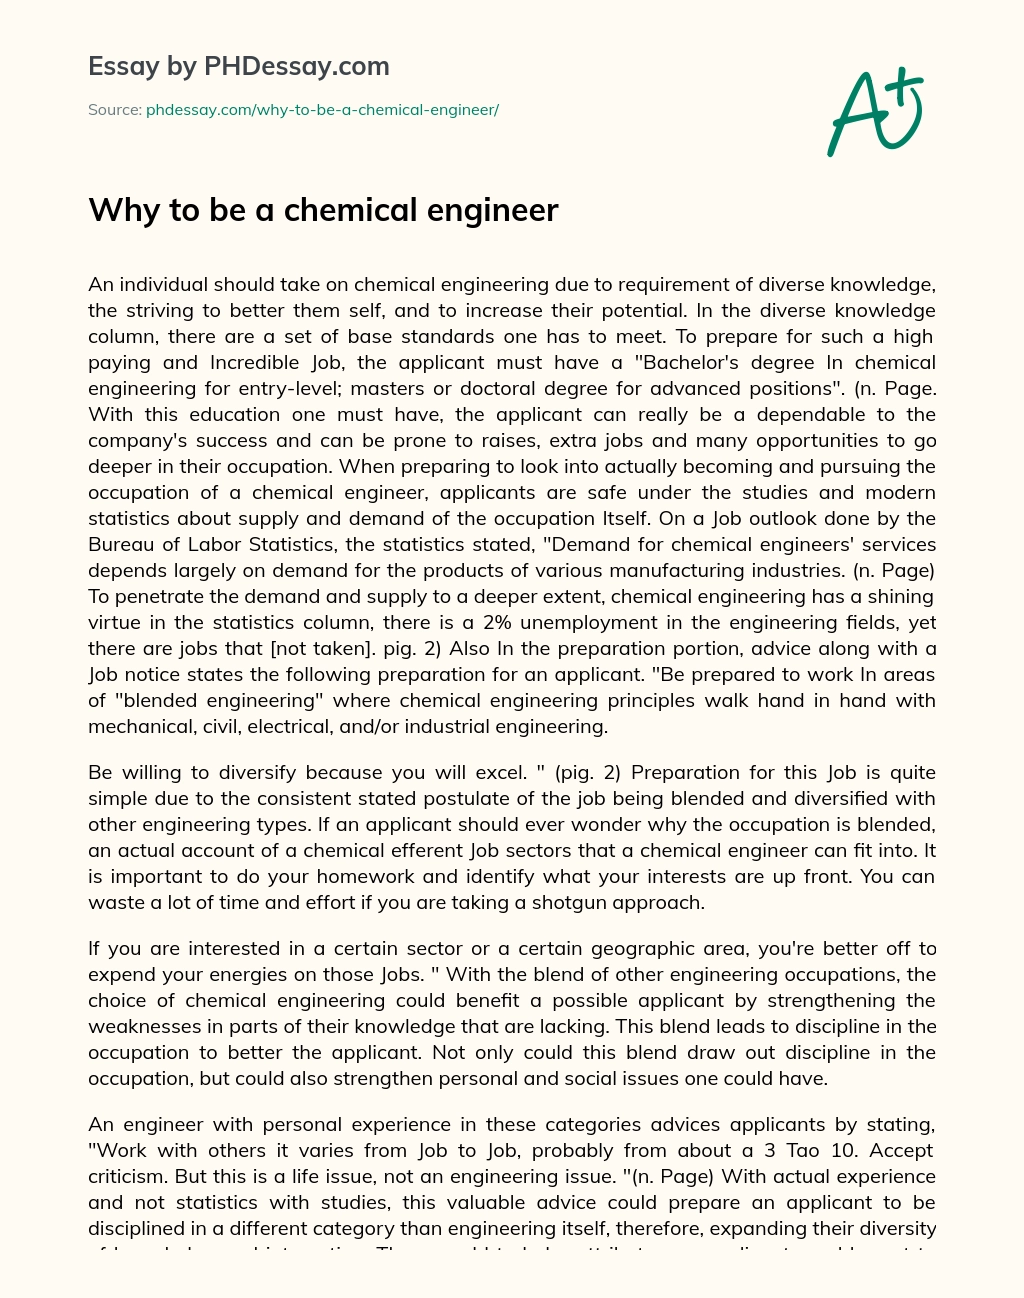 Why To Be a Chemical Engineer essay